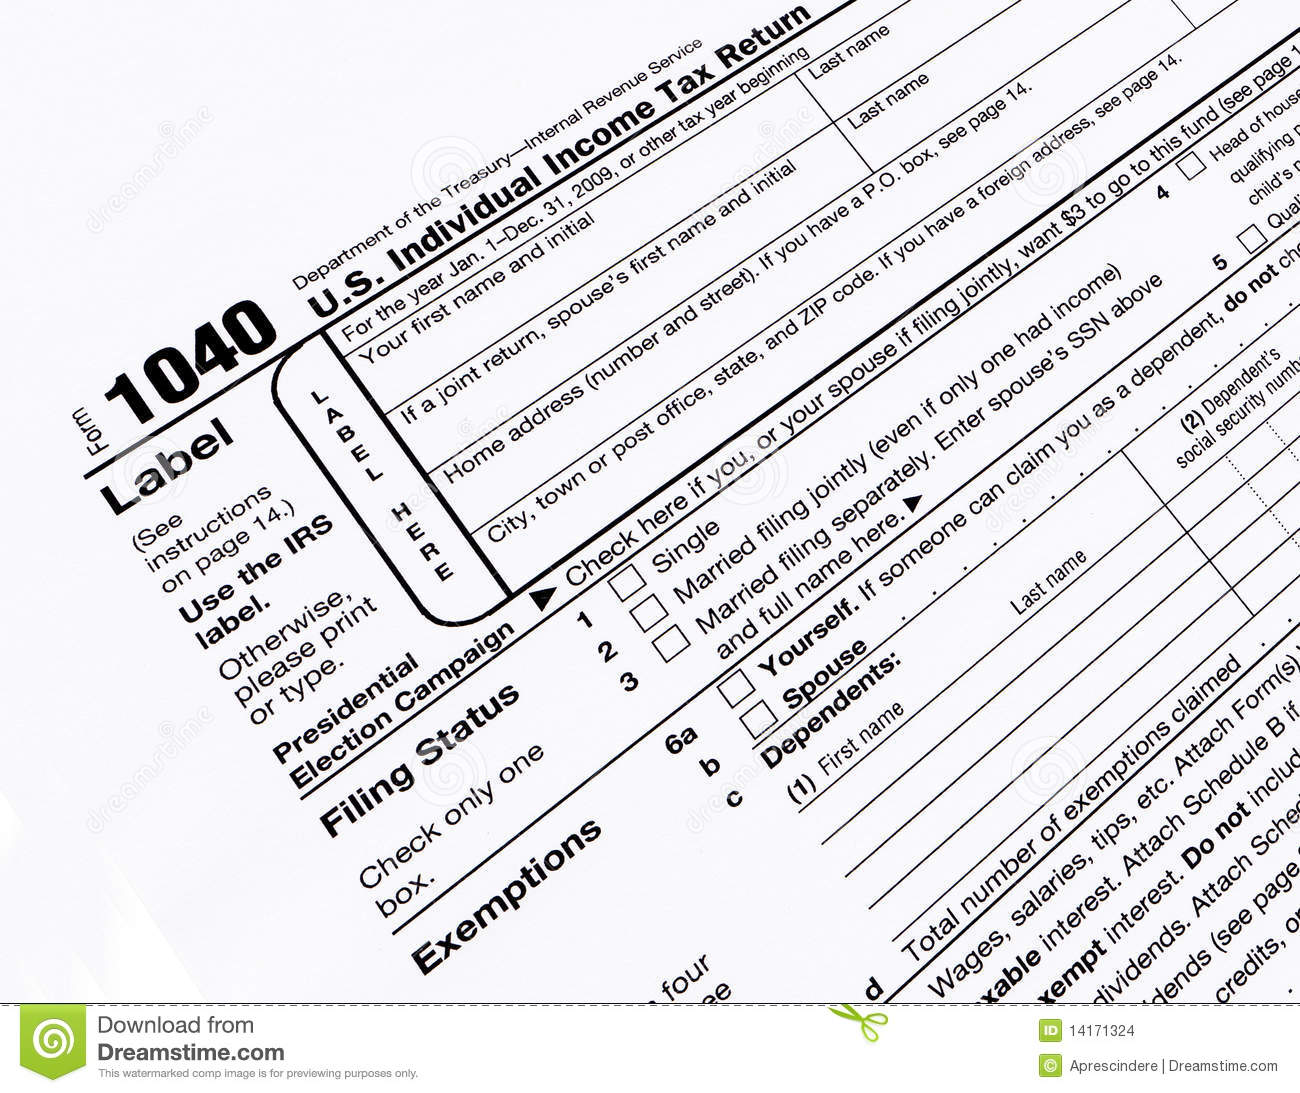 Us 1040 Tax Form Editorial Stock Image   Image  14171324